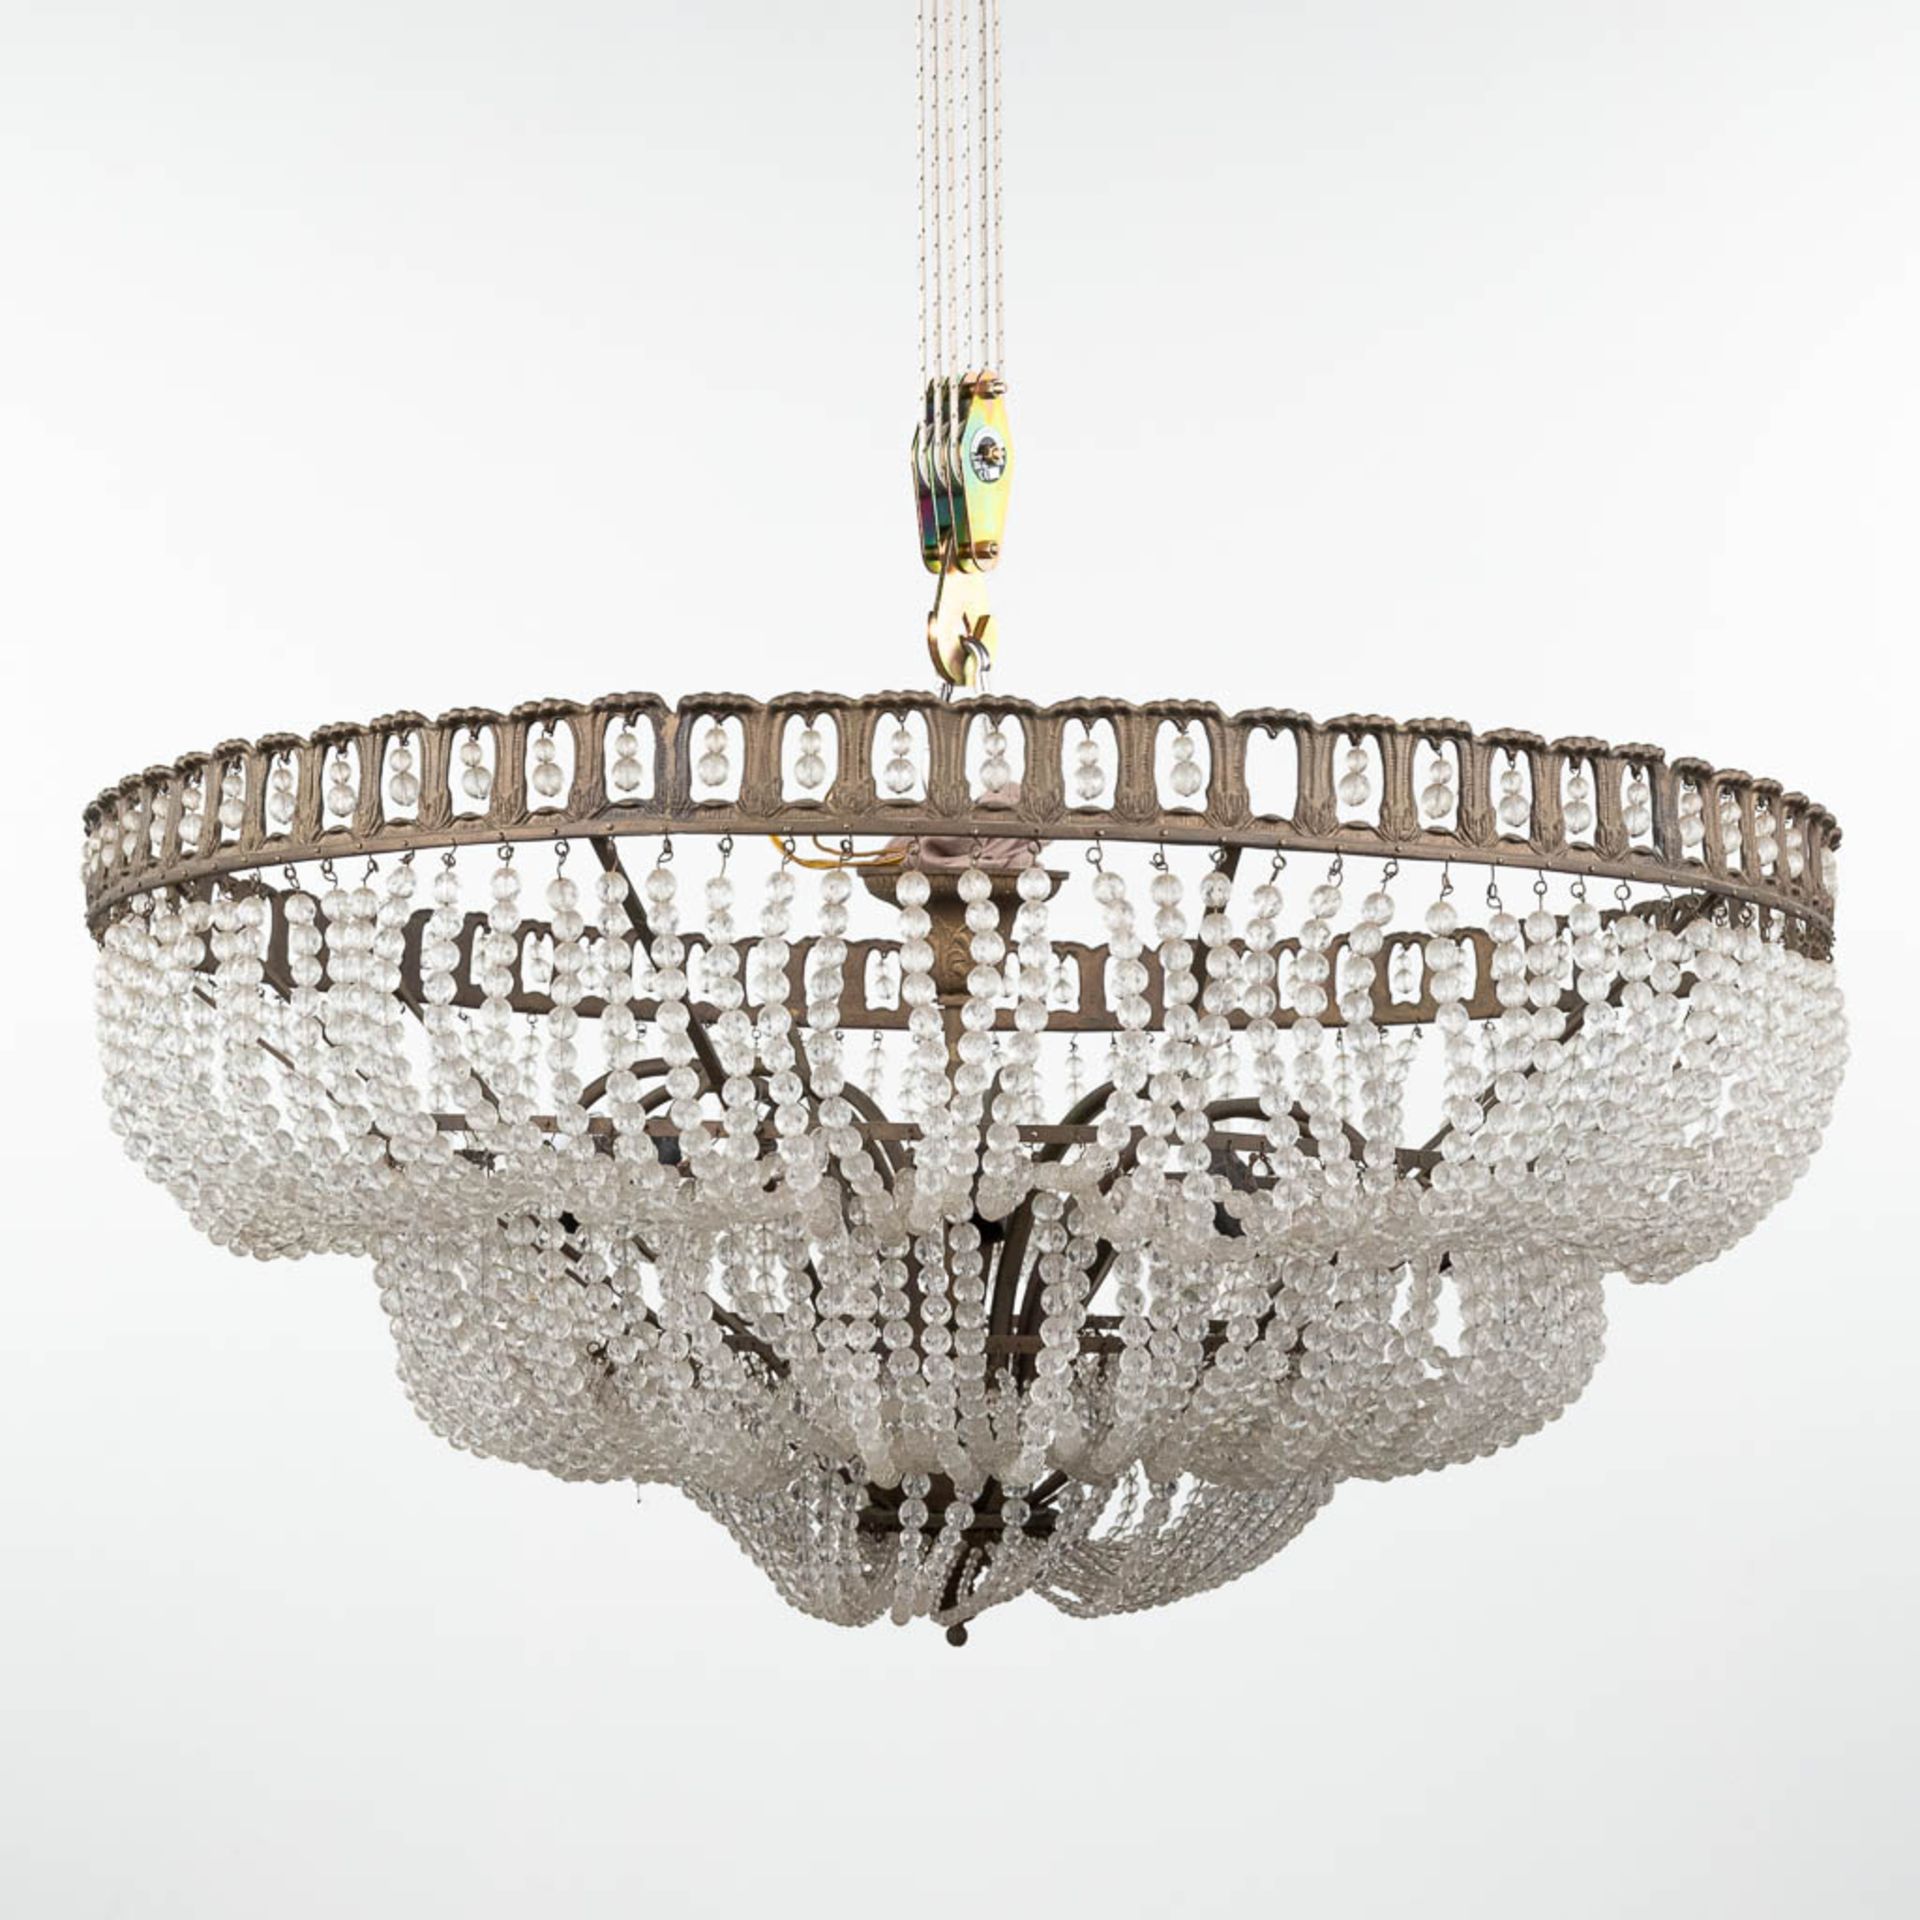 A large chandelier 'Sac A Perles' made of brass and glass. (H:40 x D:91 cm)